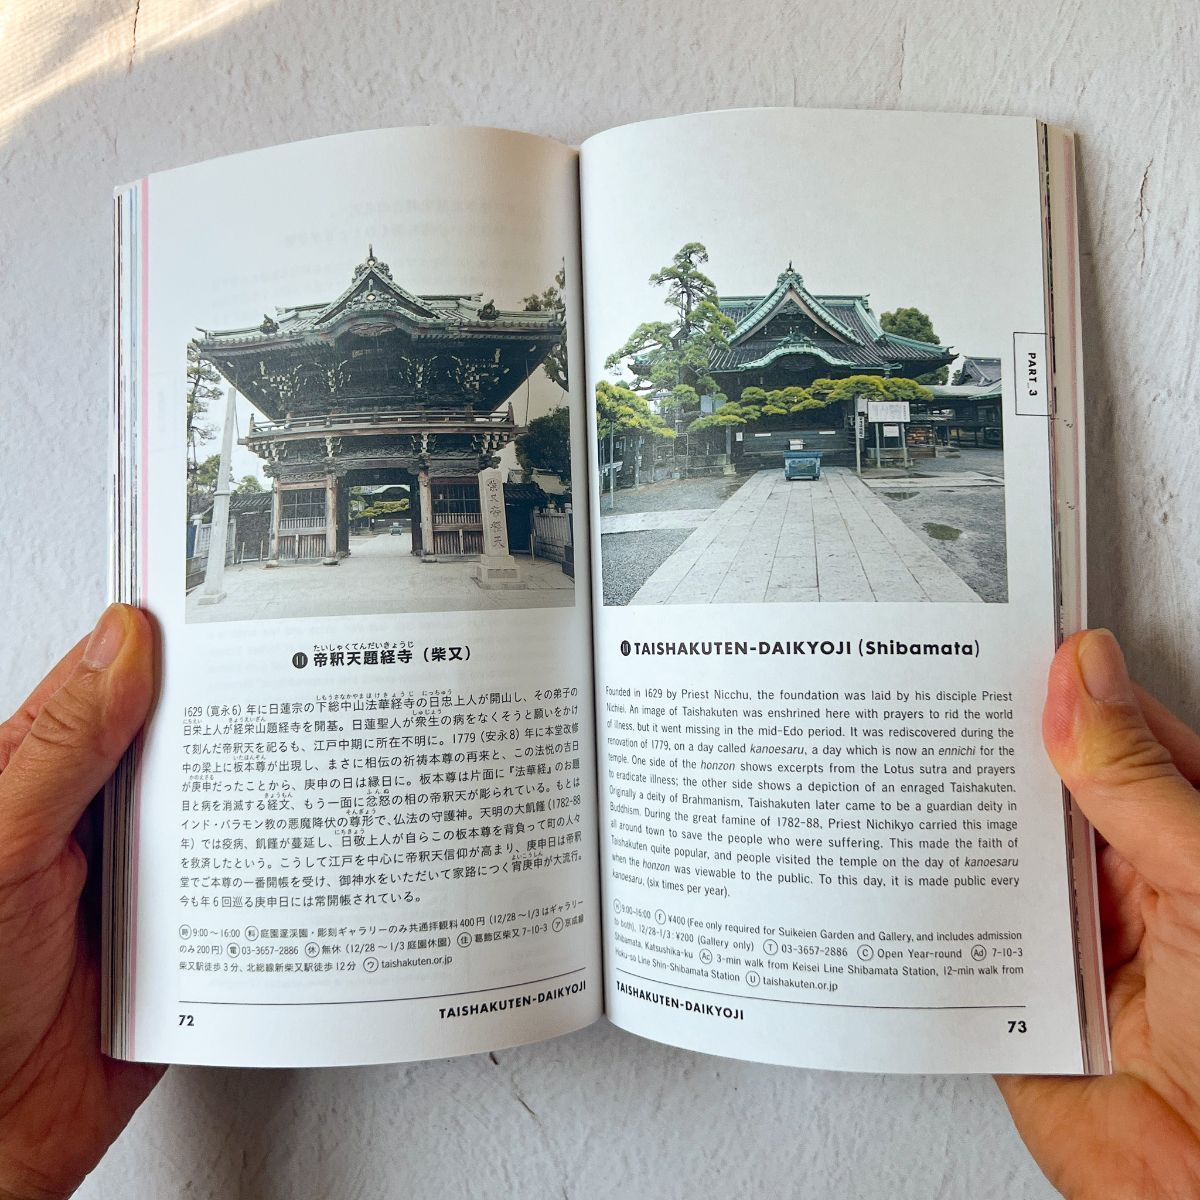 Tokyo Guide Book "TOKYO ARTRIP | Shinto Shrines and Buddhist Temples"Nagamochi Shop